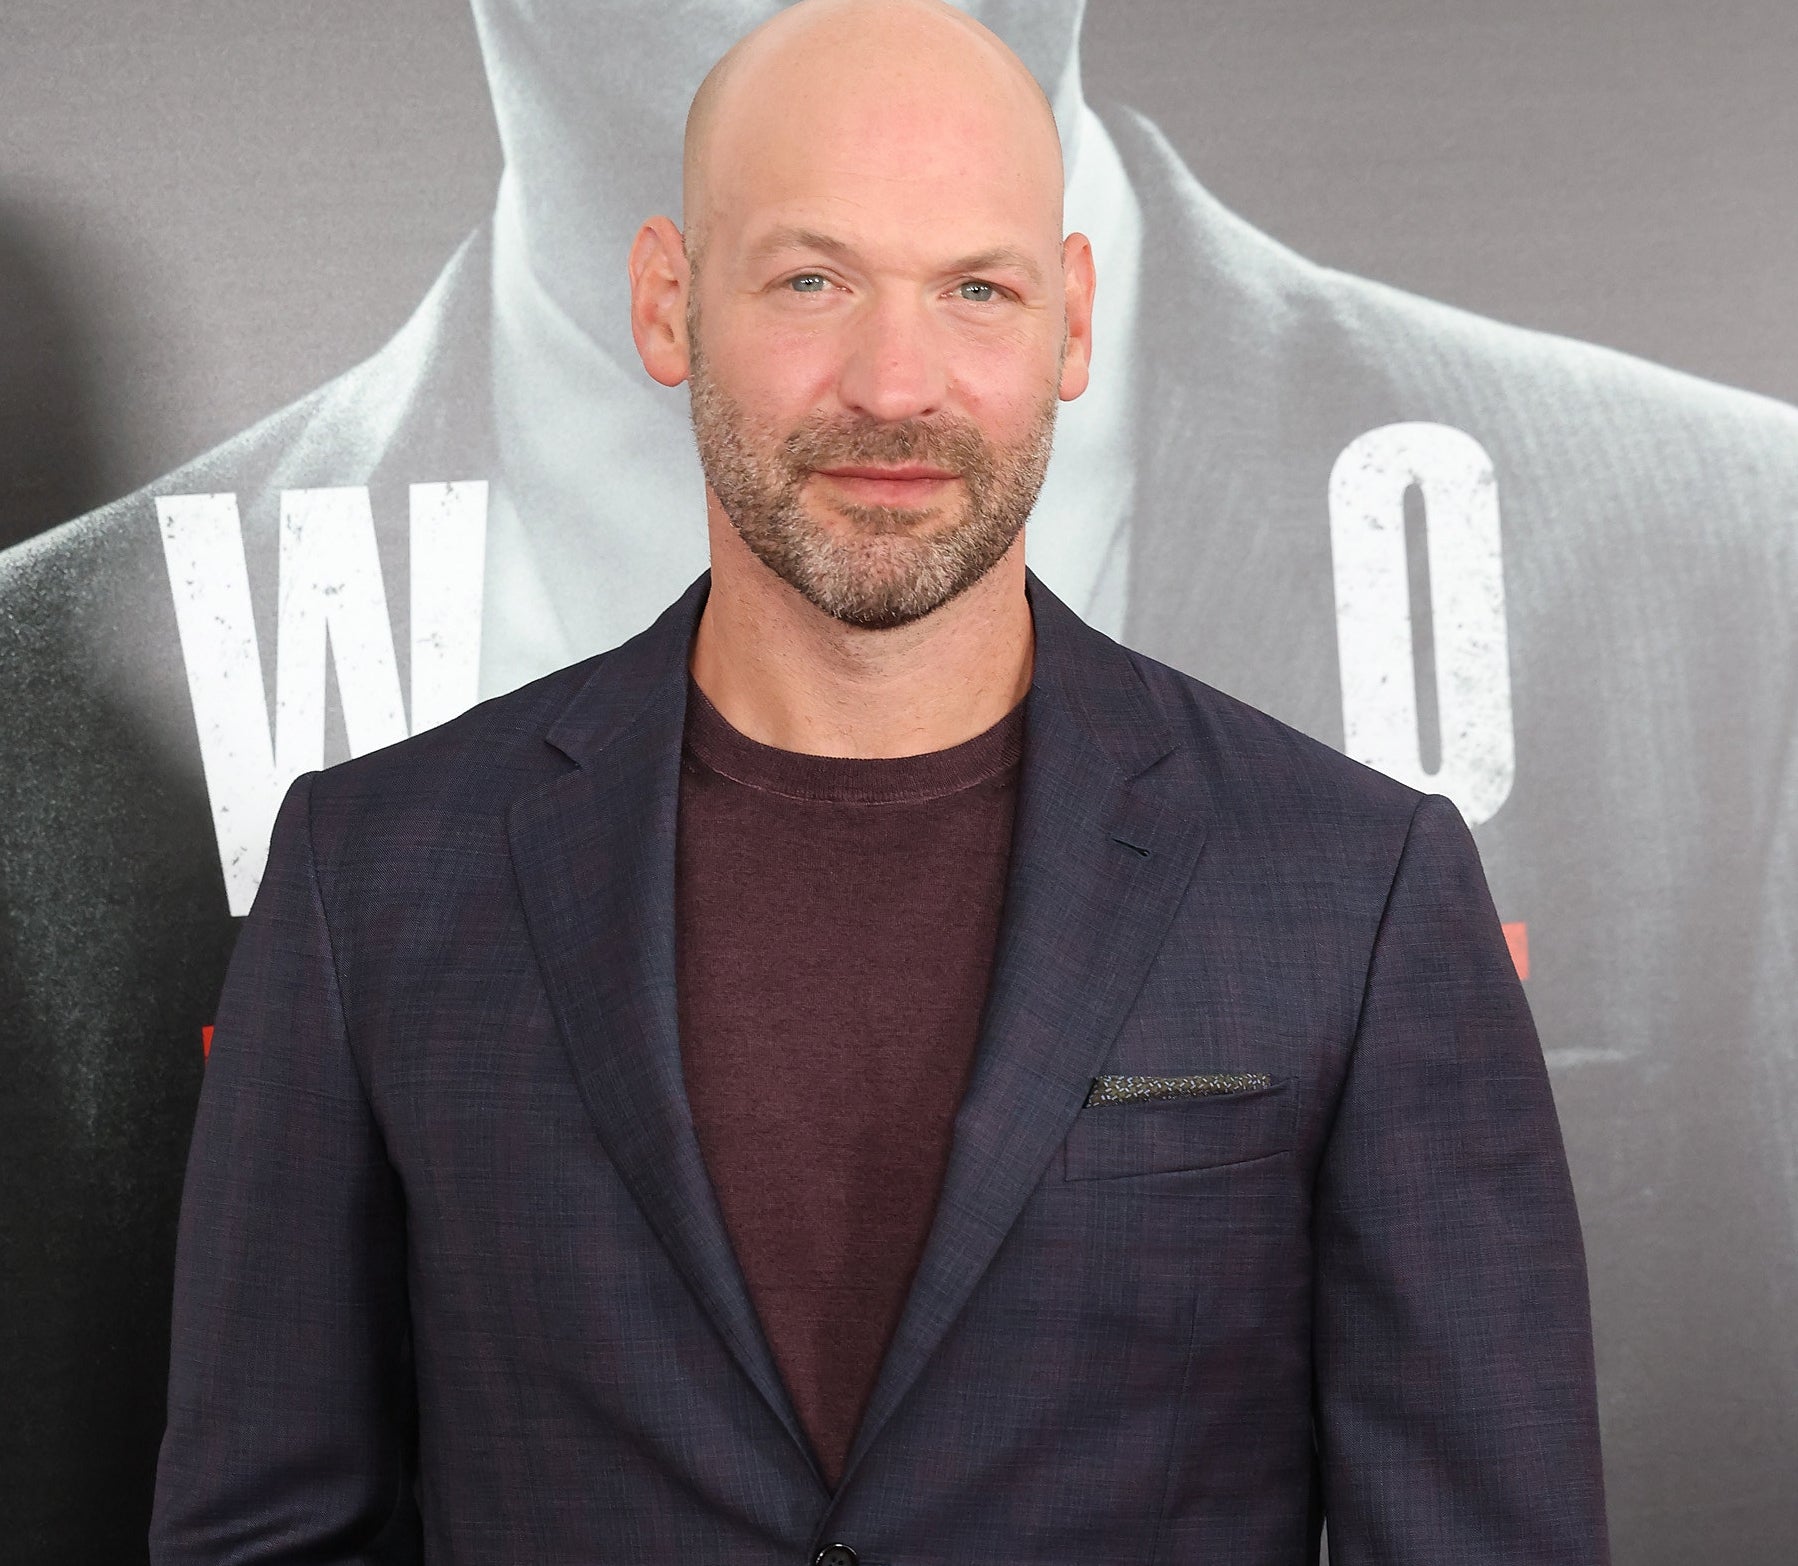 Corey Stoll on the red carpet